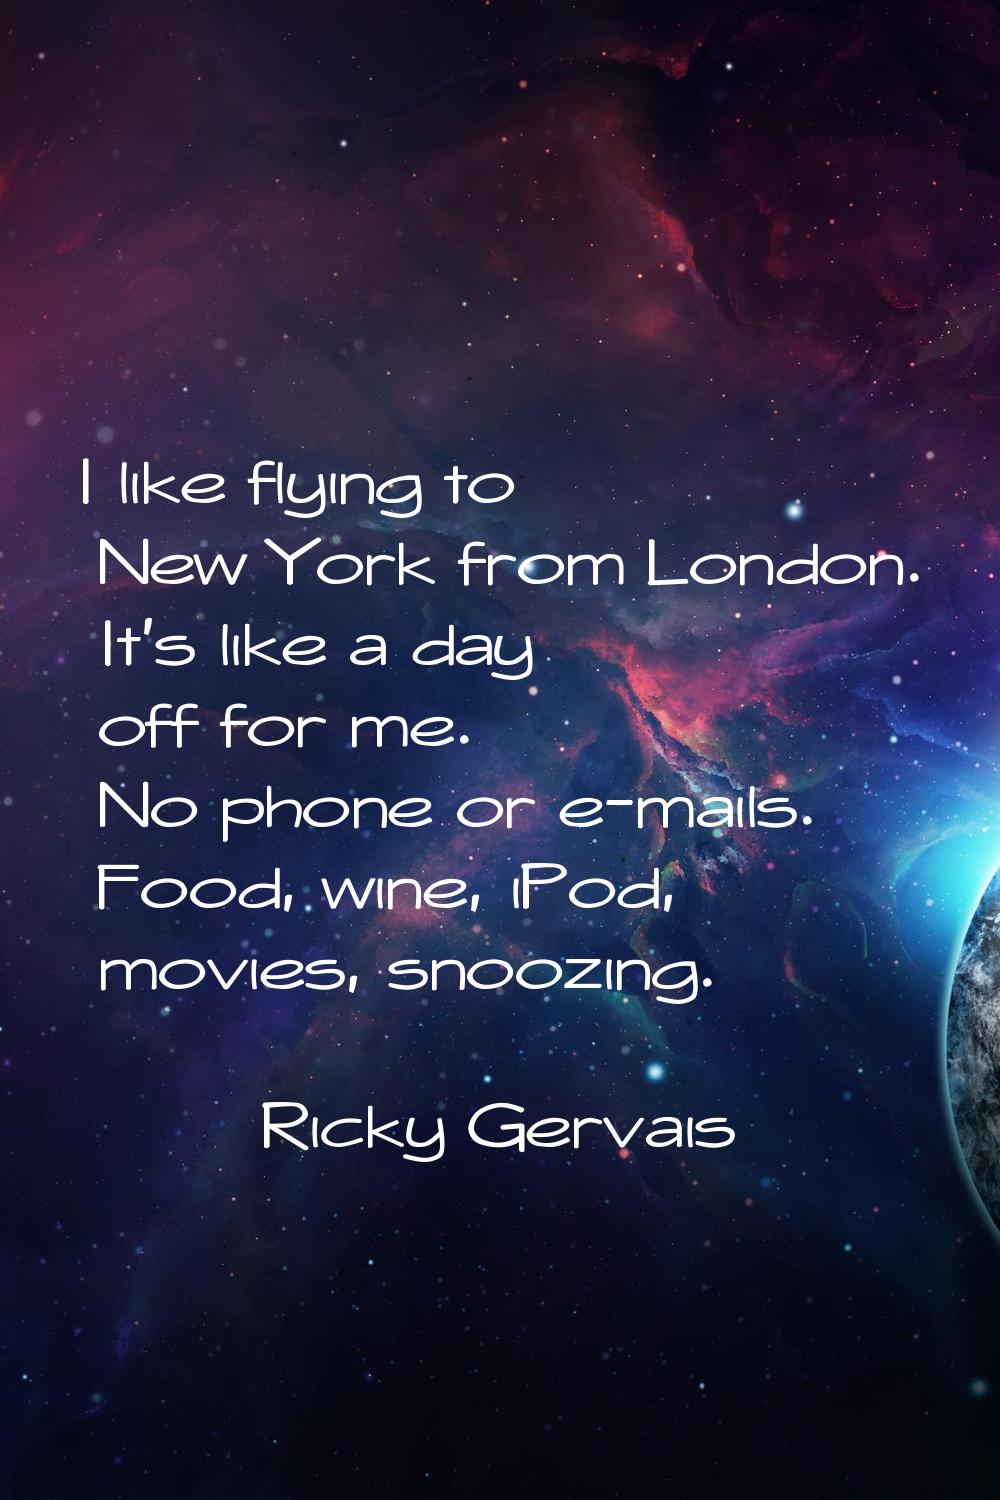 I like flying to New York from London. It's like a day off for me. No phone or e-mails. Food, wine,